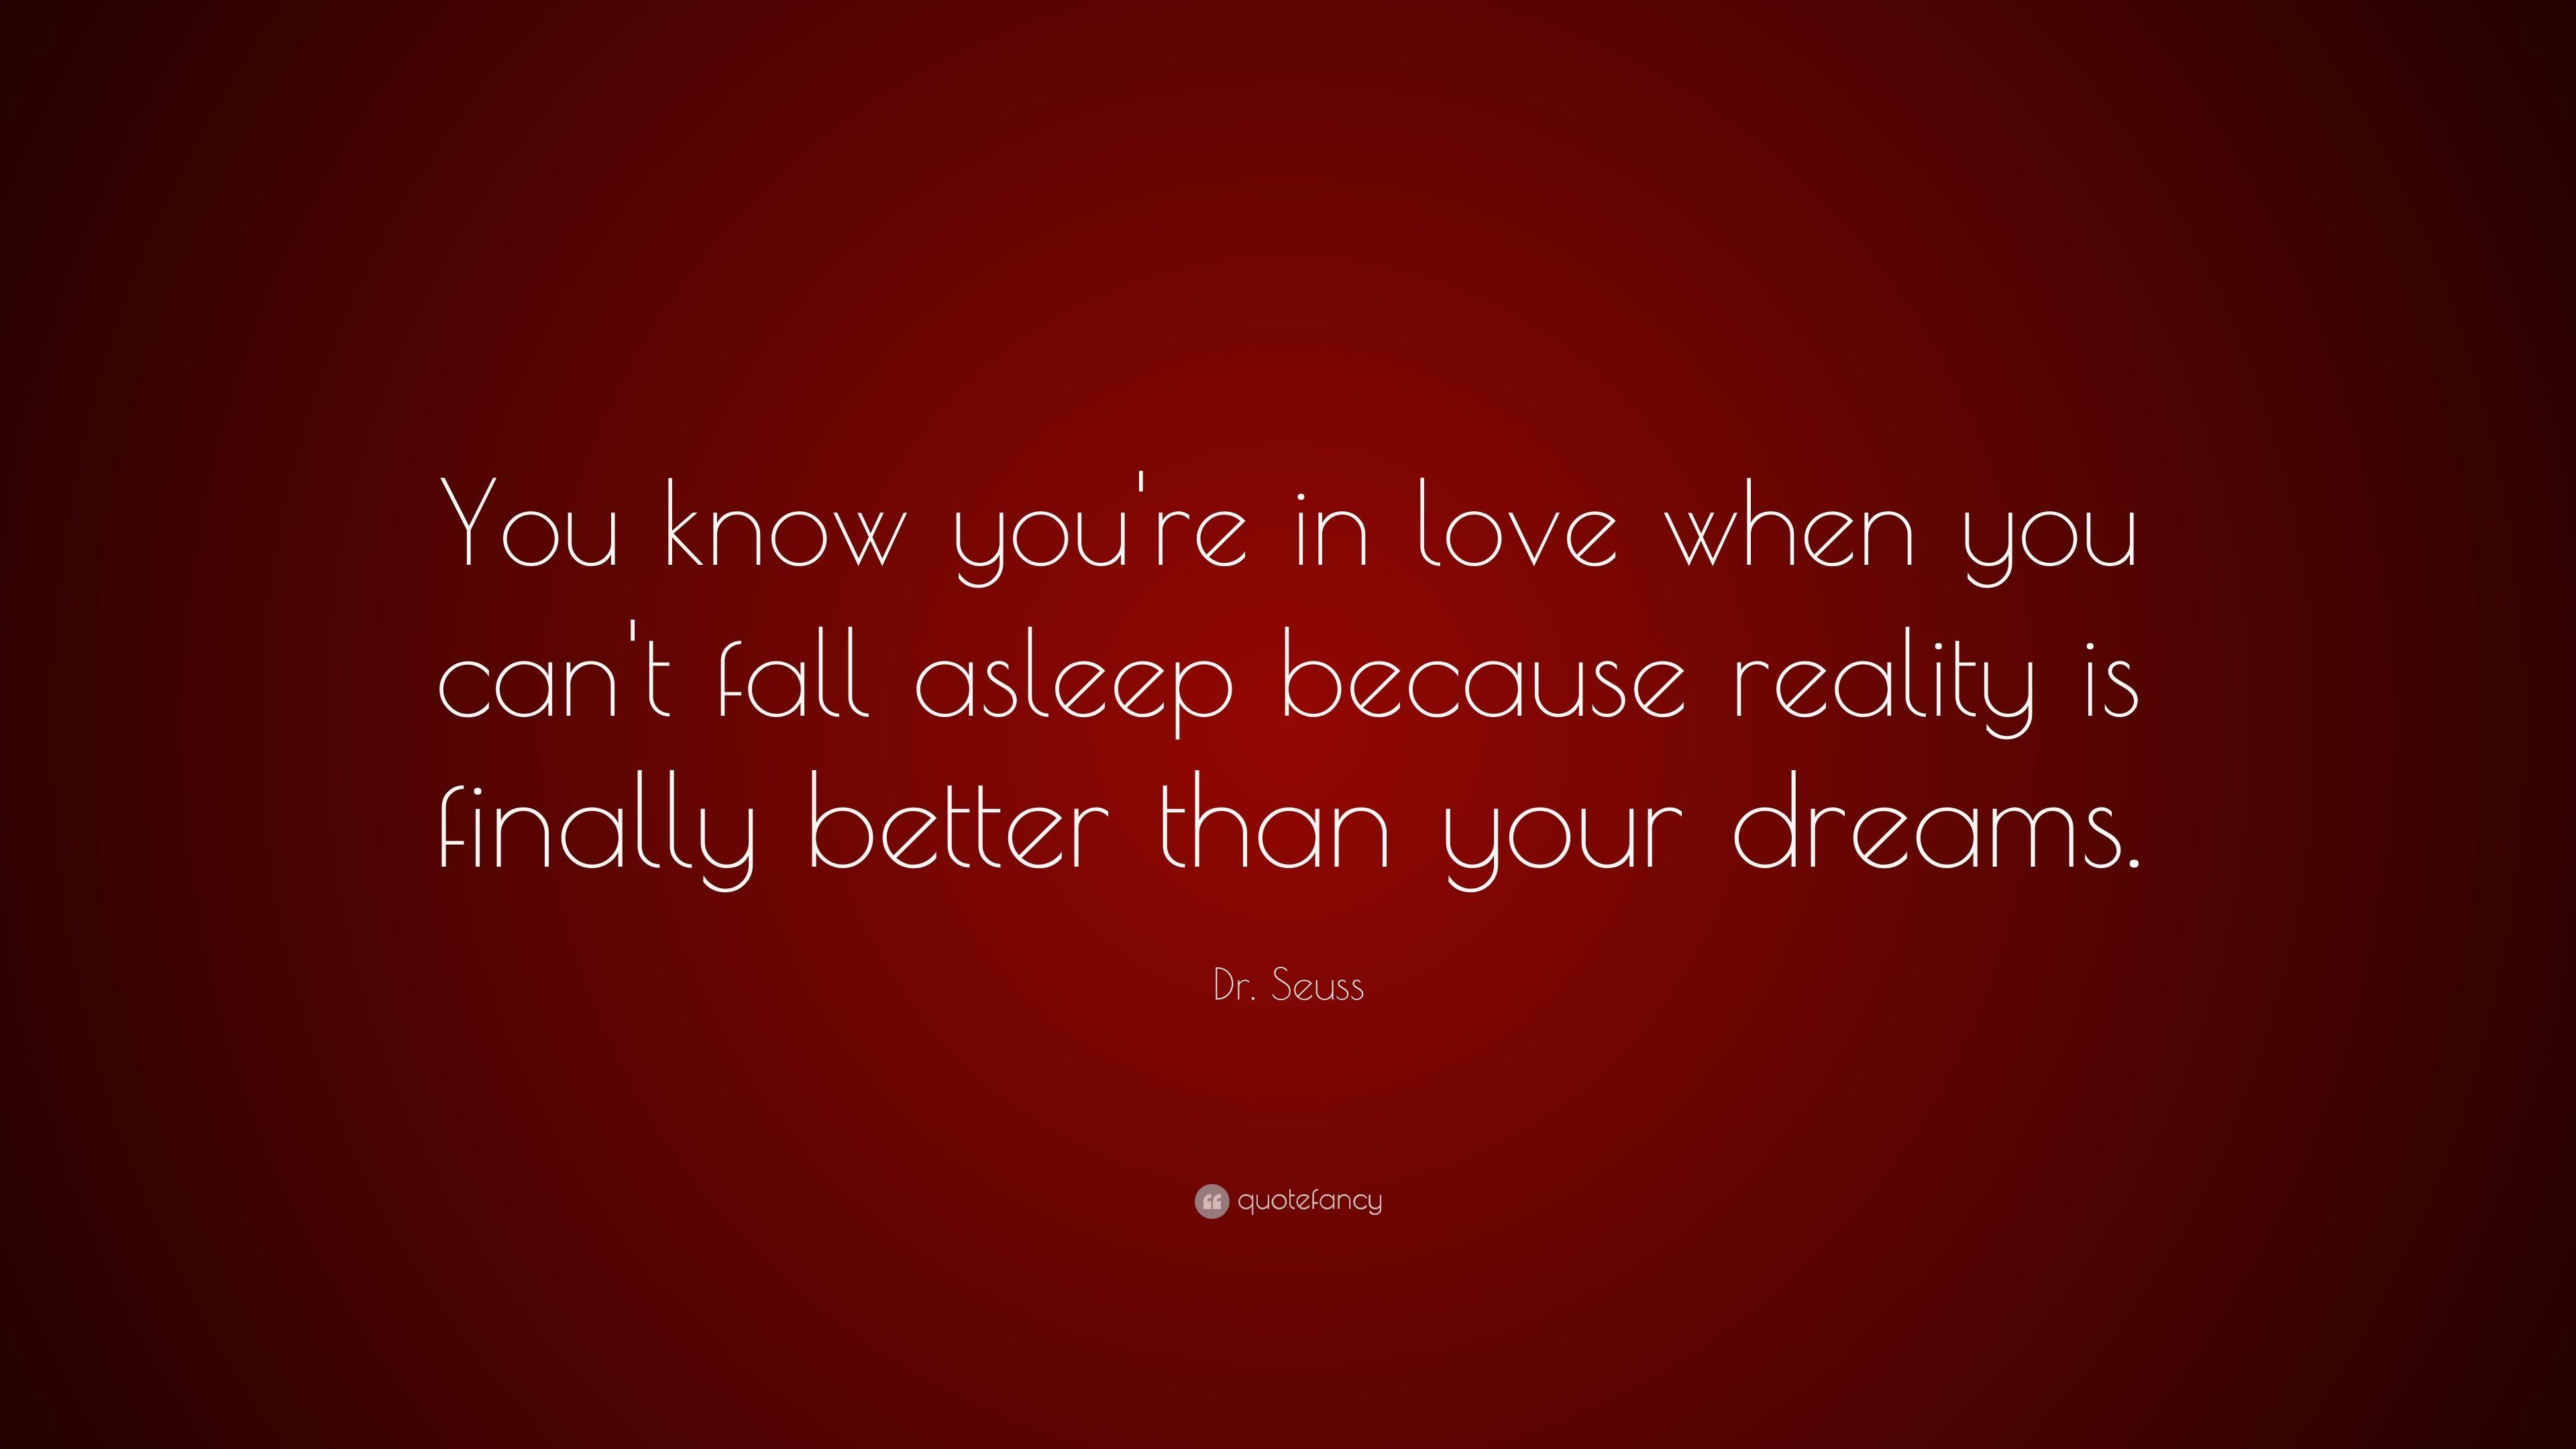 Dr. Seuss Quote: “You know you're in love when you can't fall